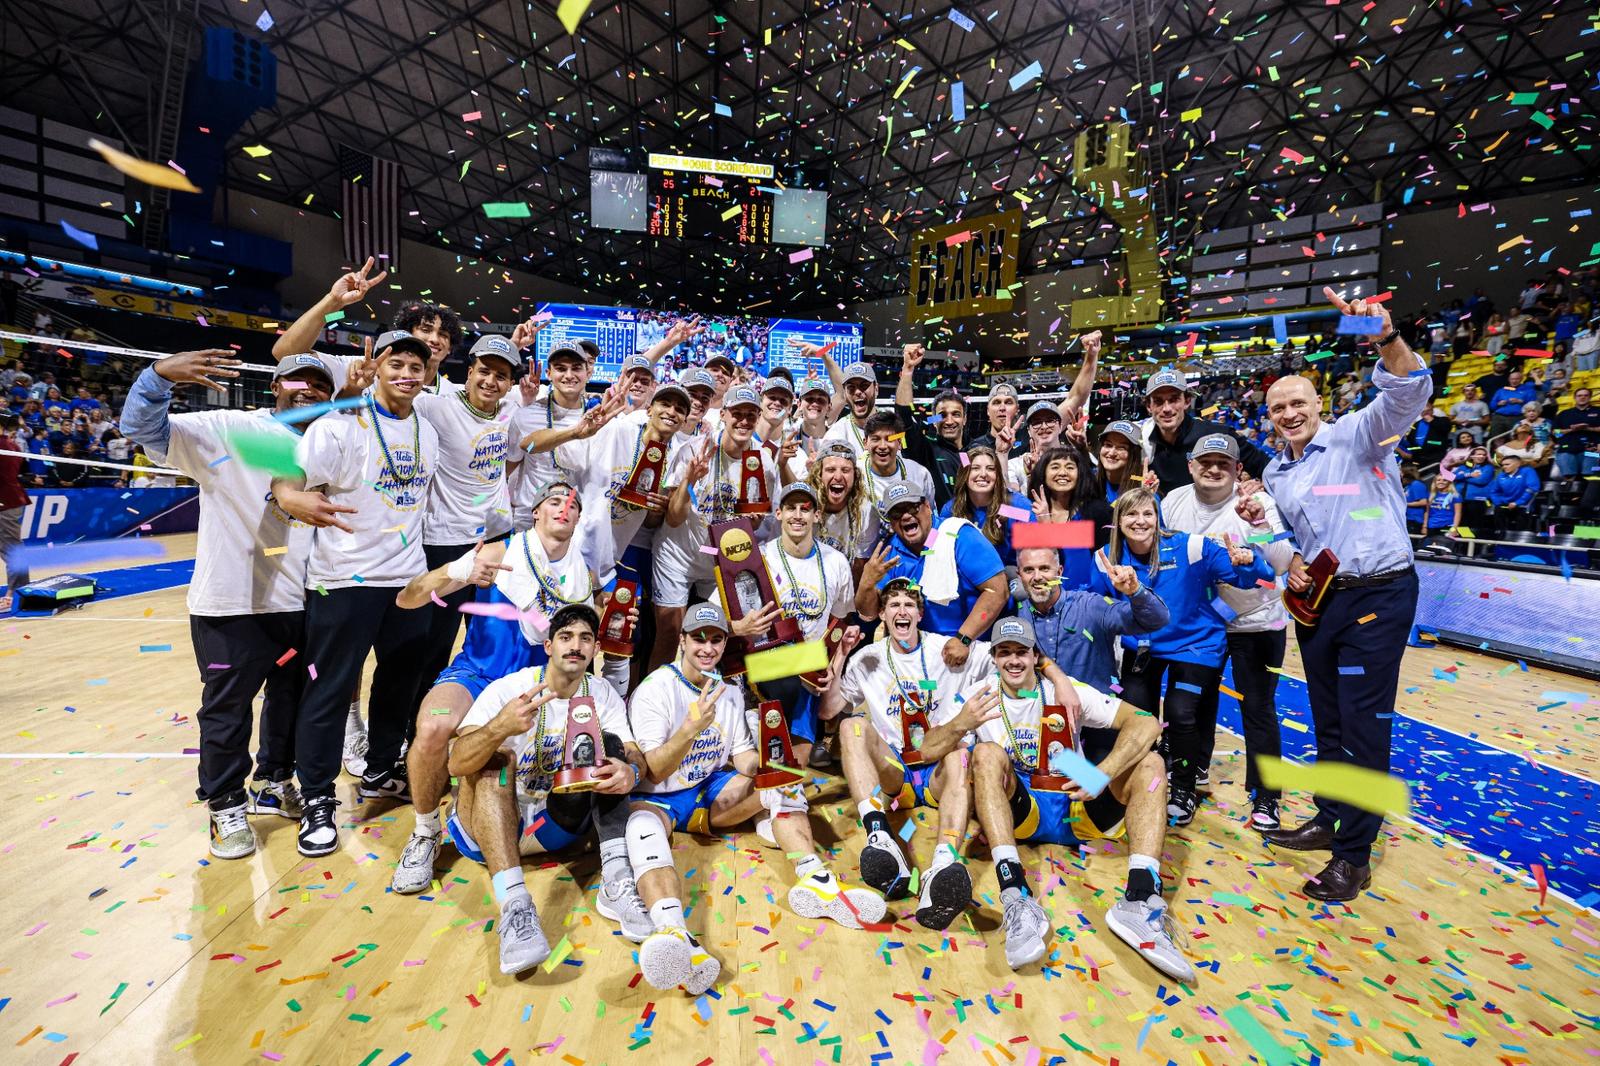 UCLA Men’s Volleyball Clinches 21st NCAA Championship with Back-to-Back Wins